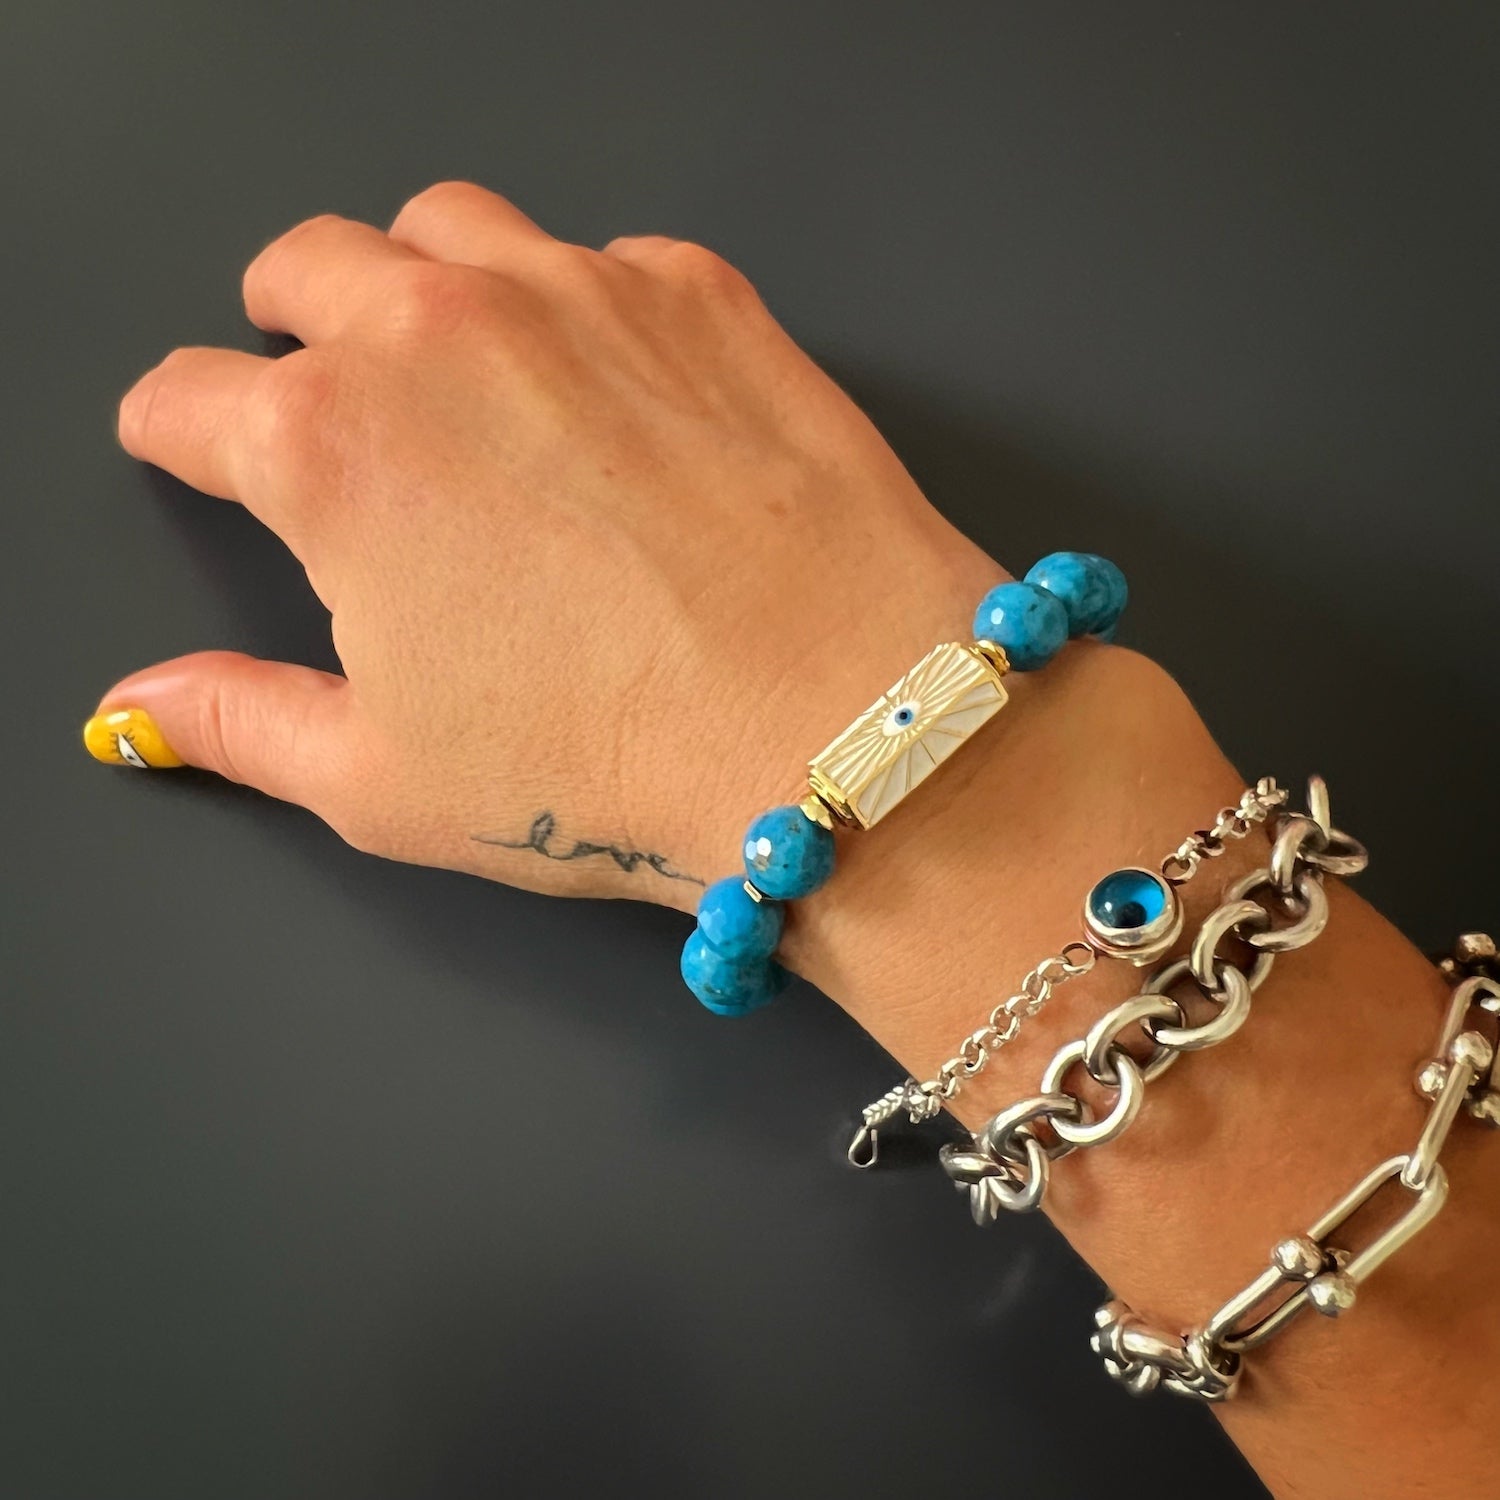 See how the Turquoise Luck and Protection Bracelet adorns the hand model's wrist, adding a touch of spirituality and enhancing her style.